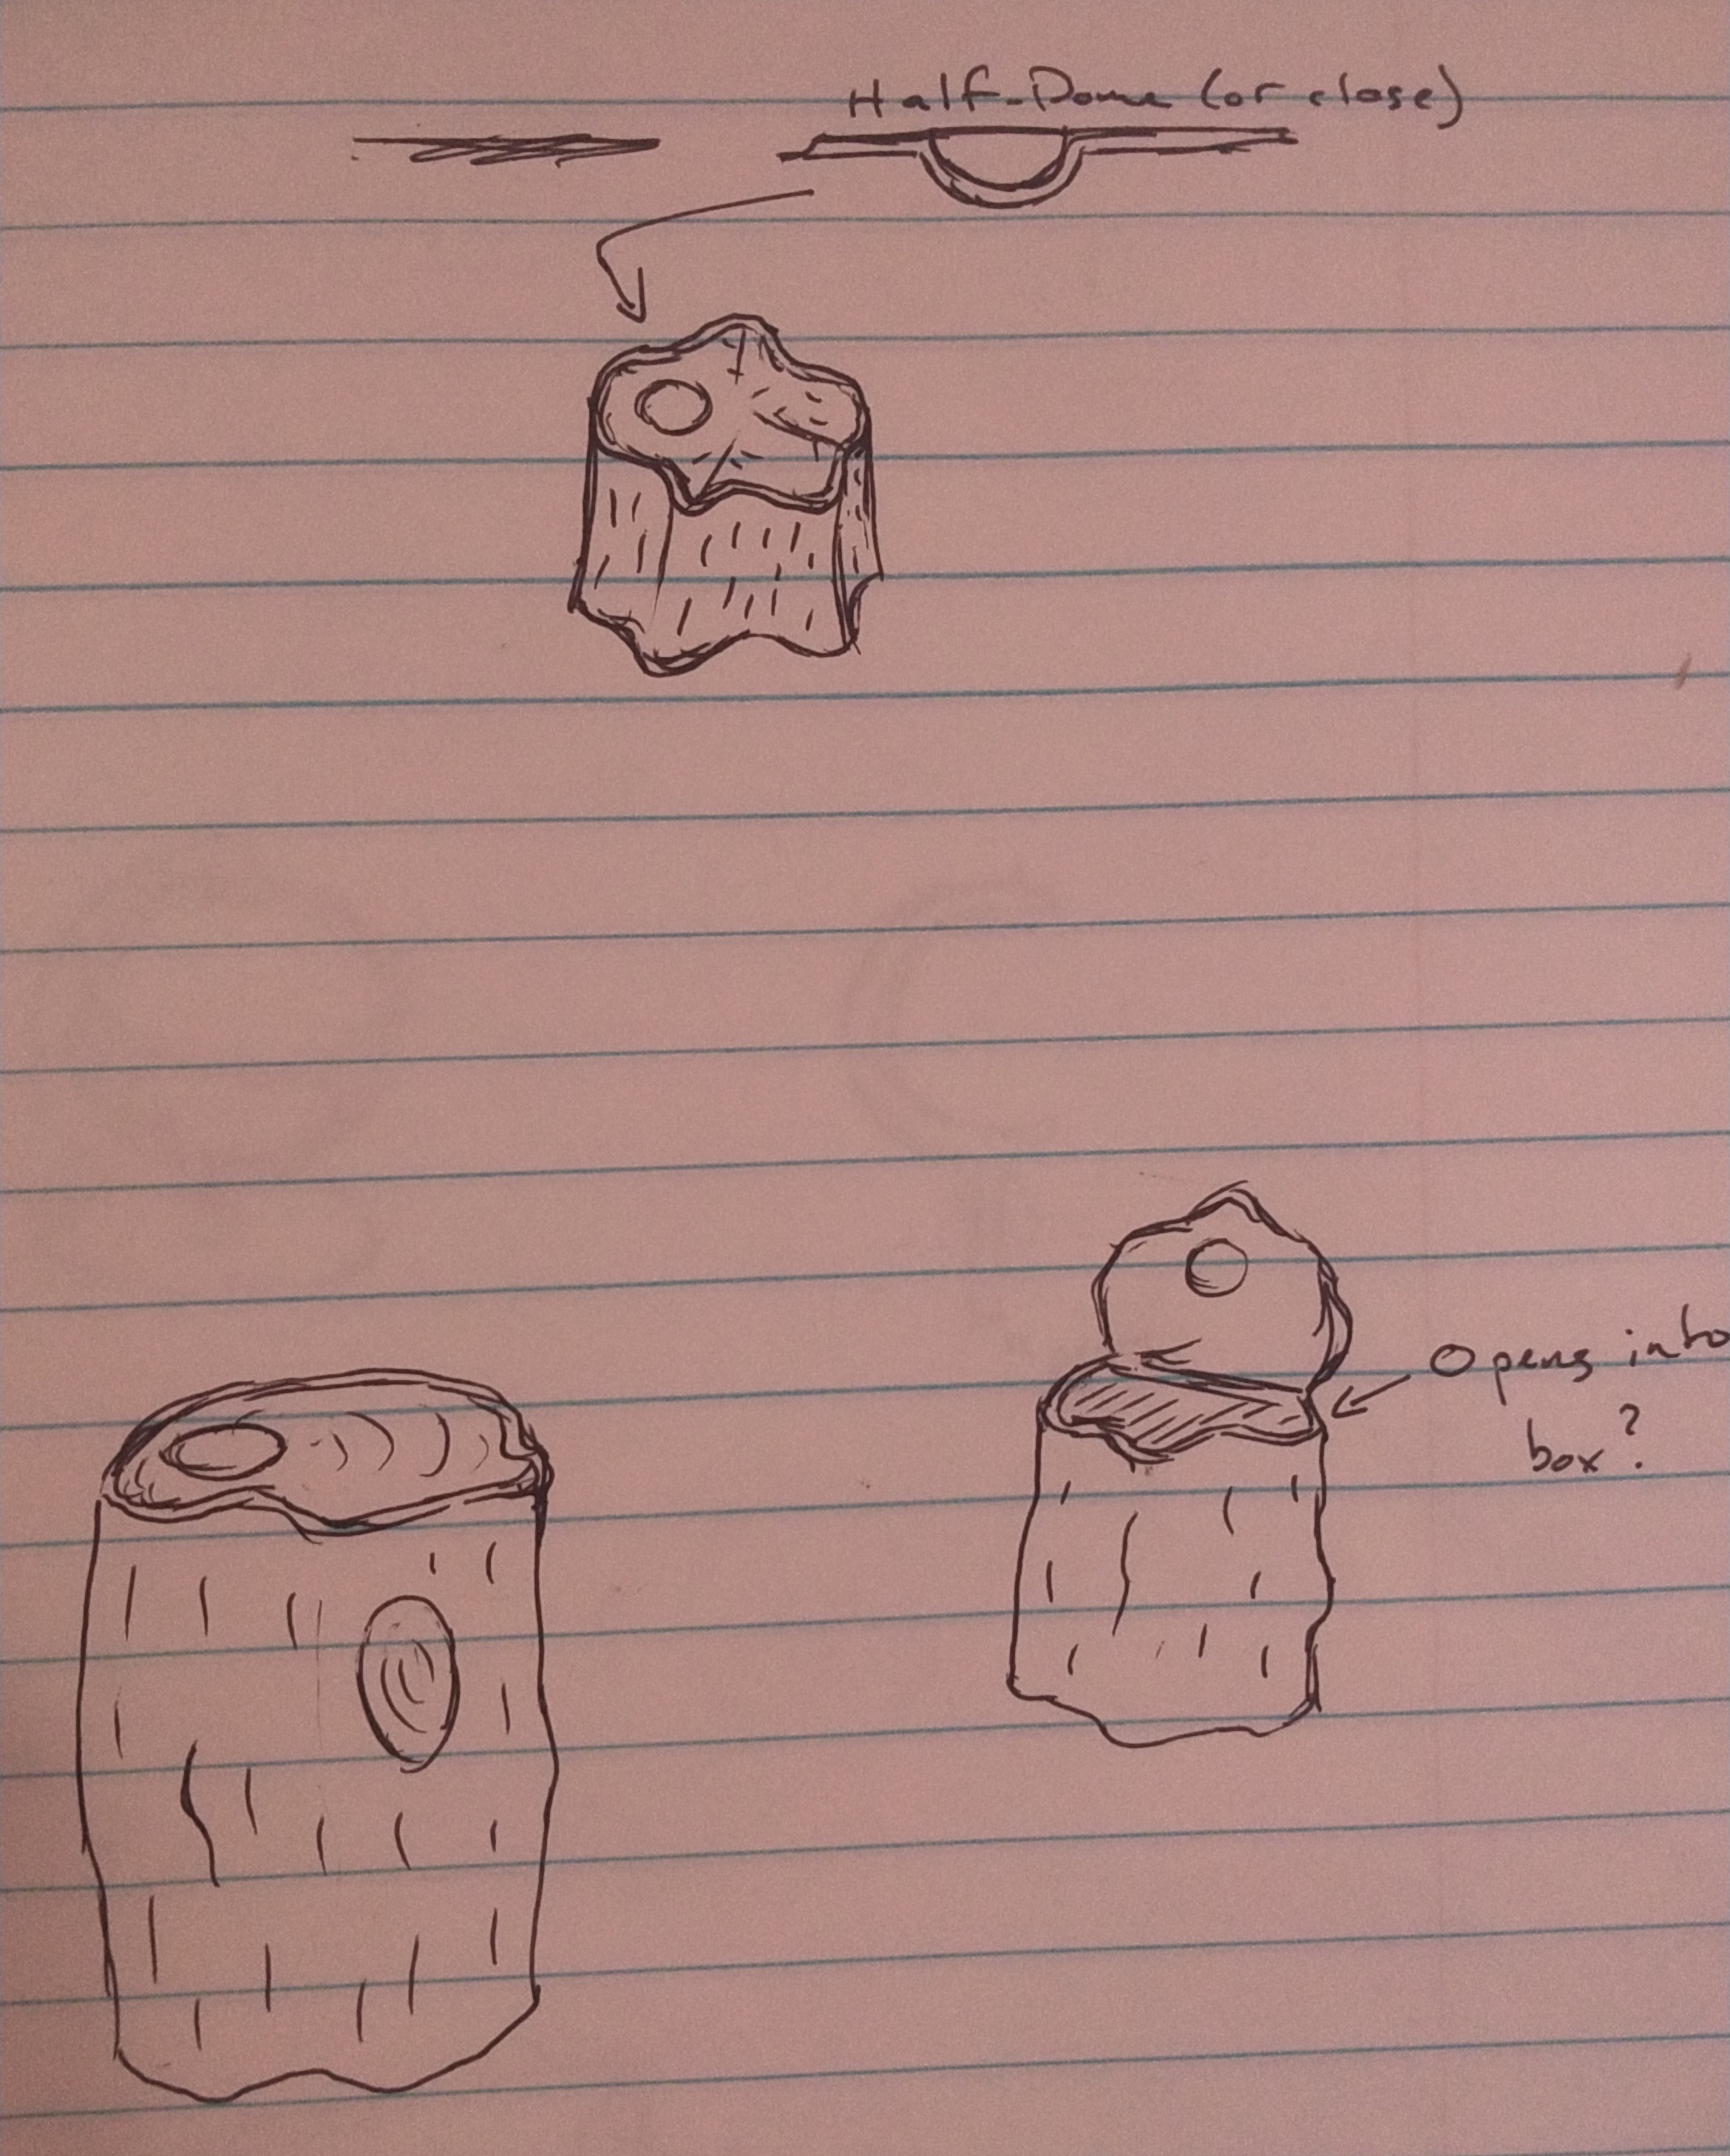 Rough drawings for a stump-shaped box